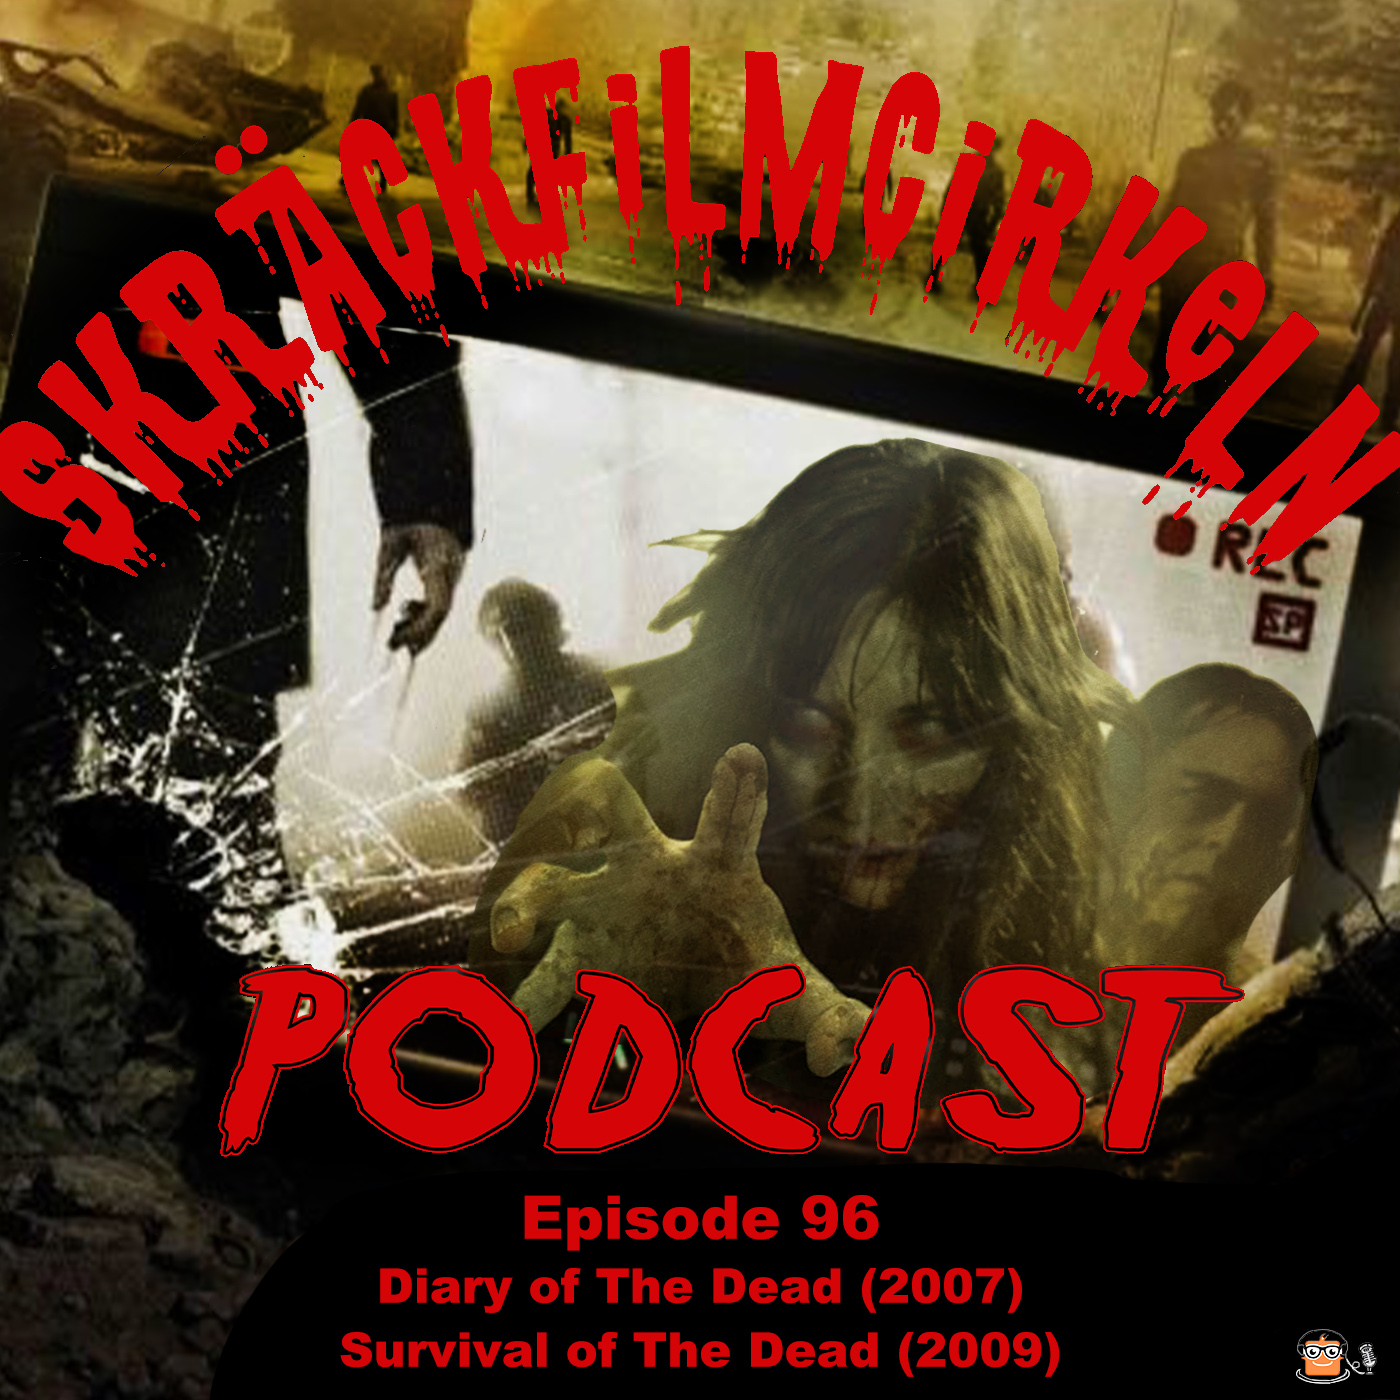 Episode 96 – Diary of The Dead (2007) & Survival of The Dead (2009)